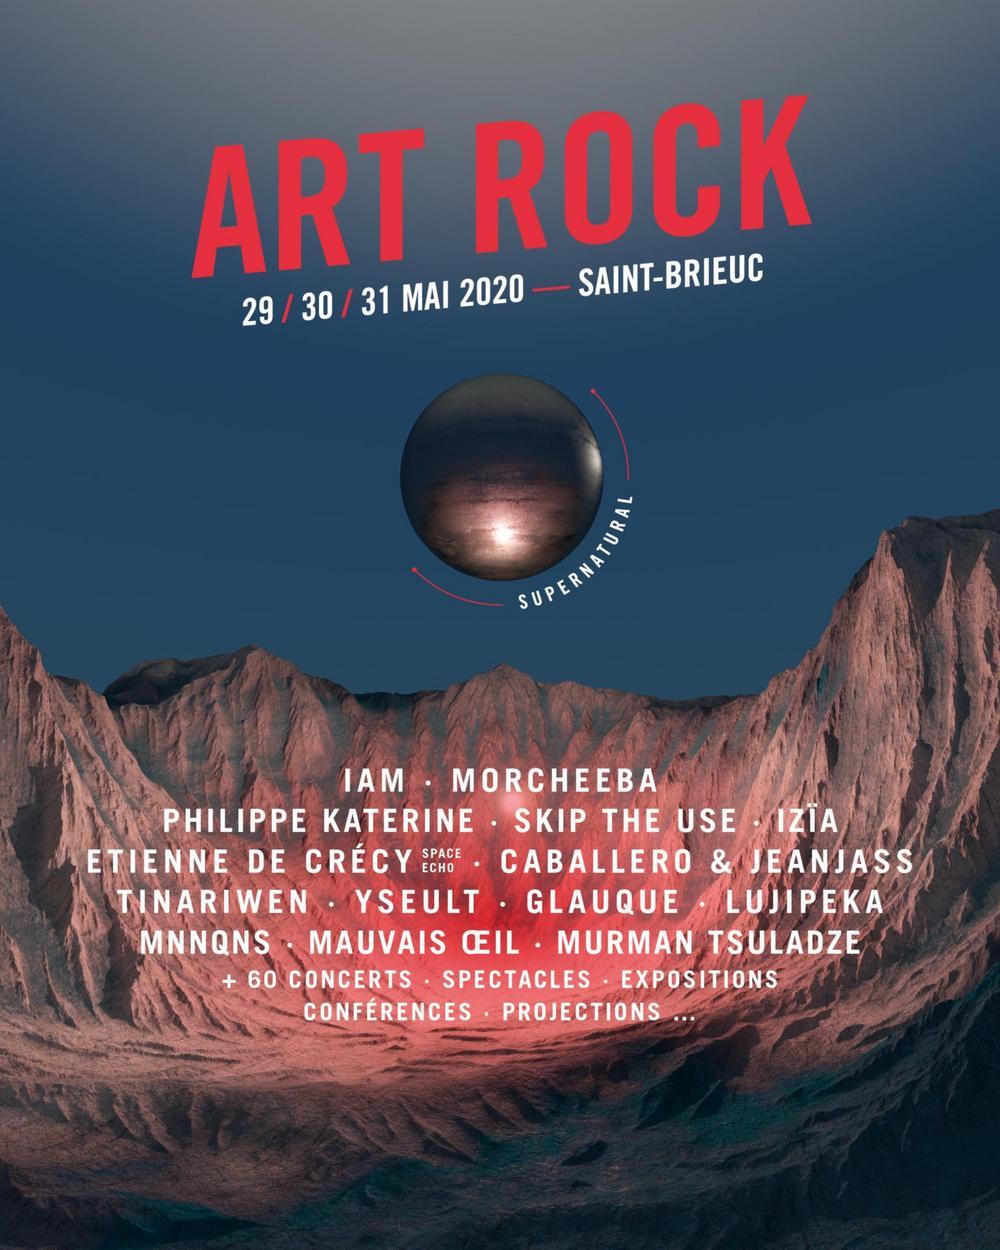 Tons Of Rock 2022 - The HU - #4 - 28.06.2019 - Tons of Rock - Norway - Blackie ... / Find tons of rock tour schedule, concert details, reviews and photos.